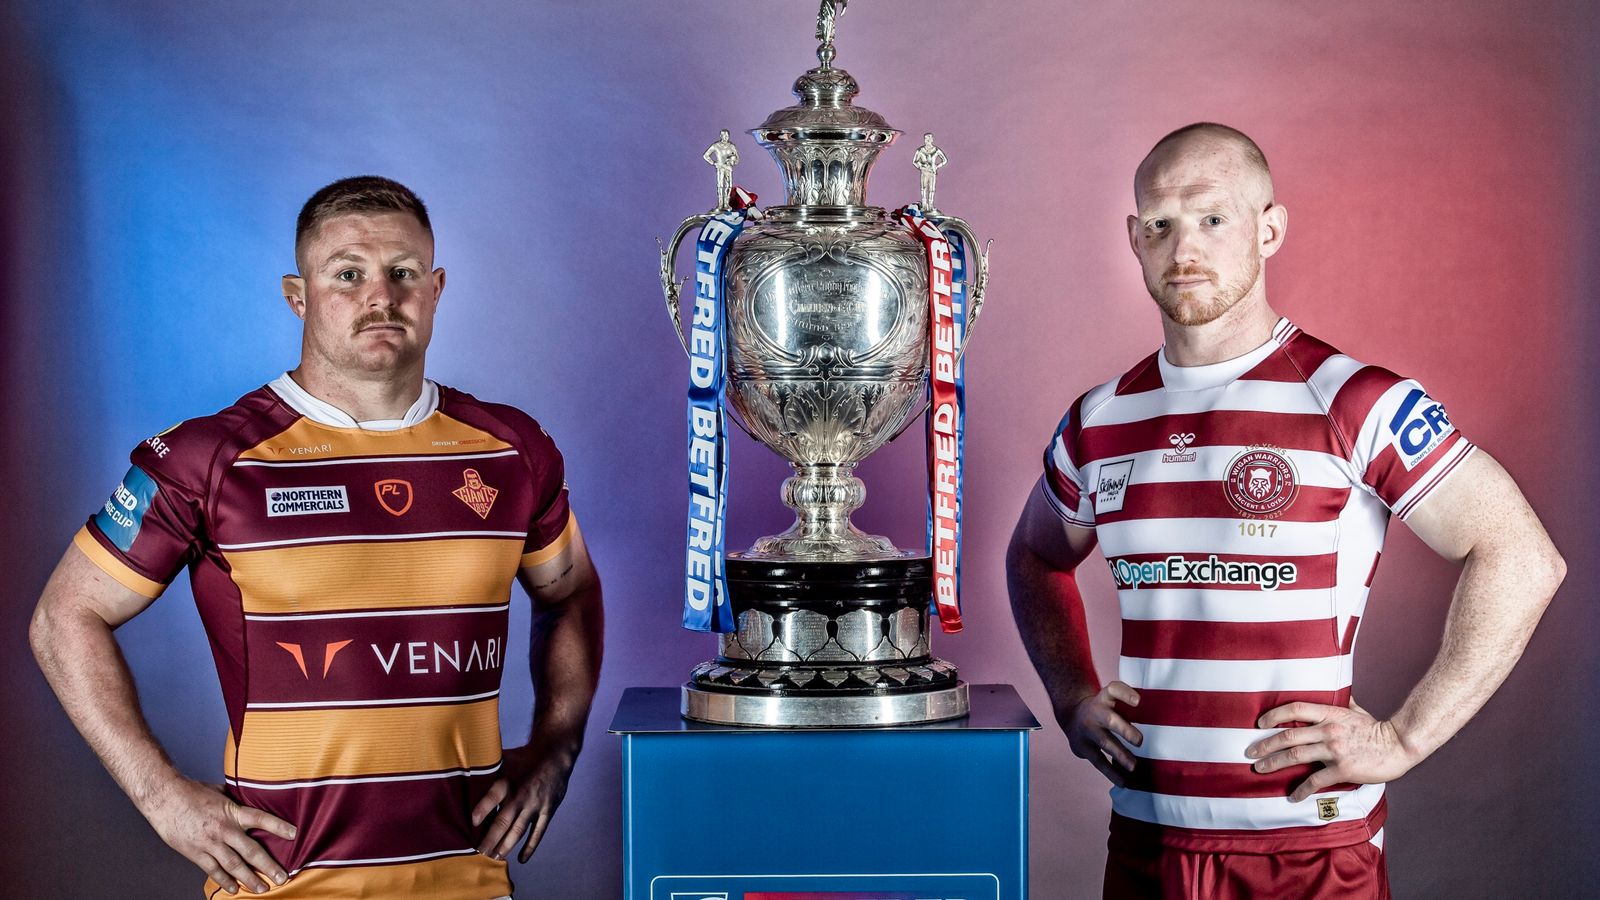 Challenge Cup final 2022 Talking points and team news as Huddersfield Giants take on Wigan Warriors Rugby League News Sky Sports